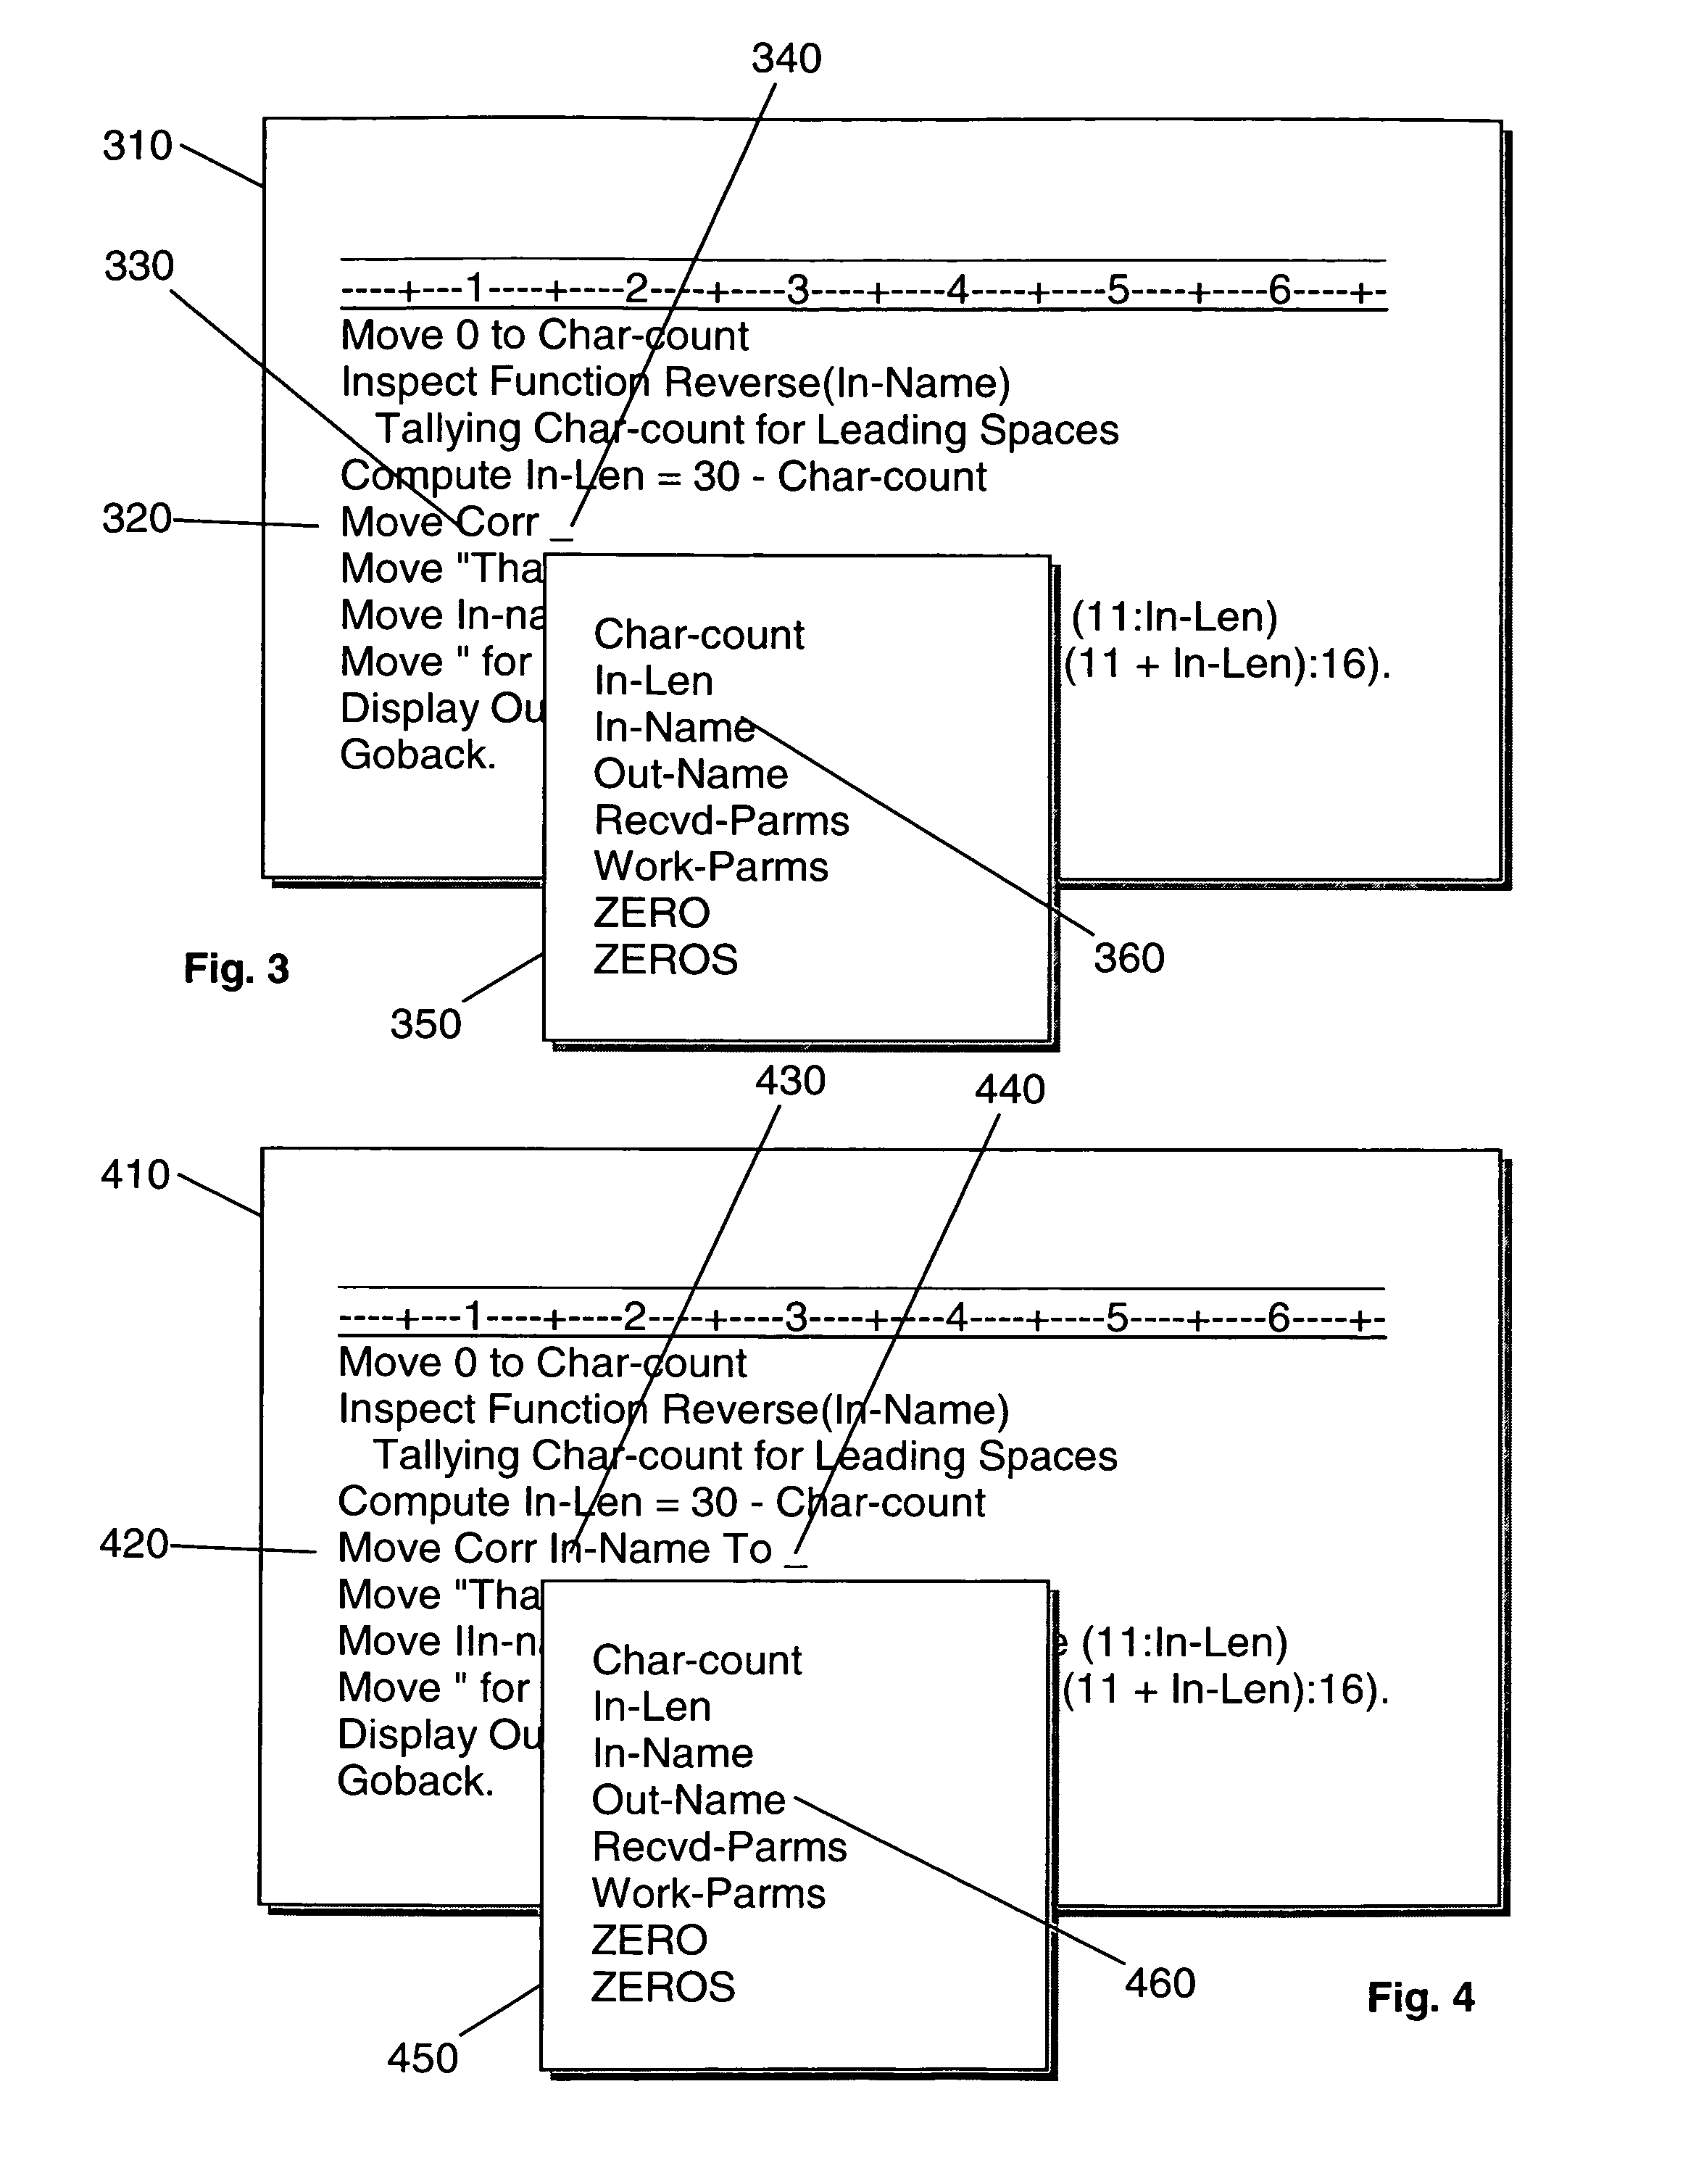 User configurable language independent code assist engine method, system, article of manufacture, and computer program product